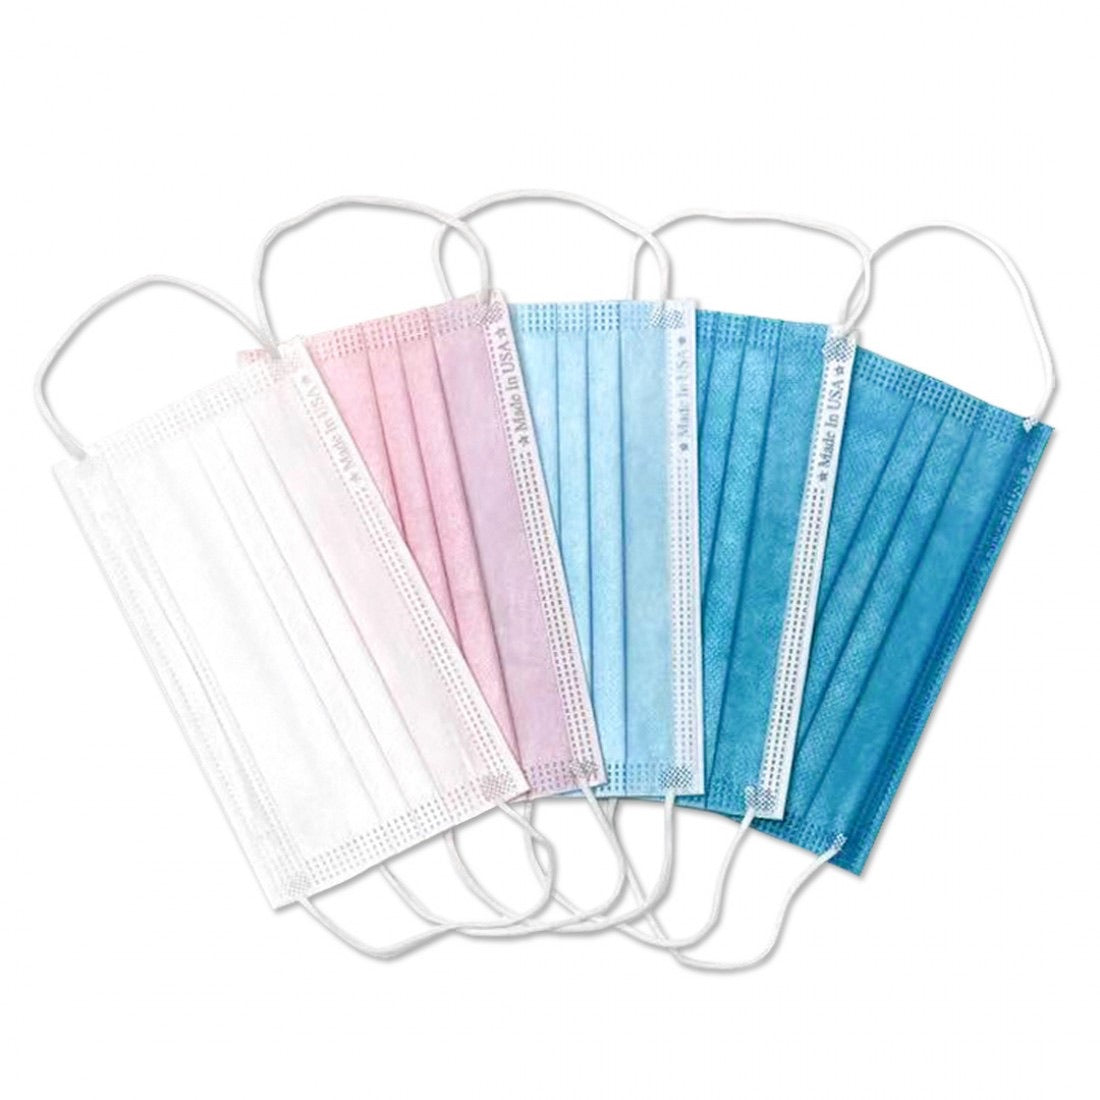 3-LAYER DISPOSABLE 5 MIXED COLOR FACE MASK MADE IN USA (50 PCS)-eSafety Supplies, Inc